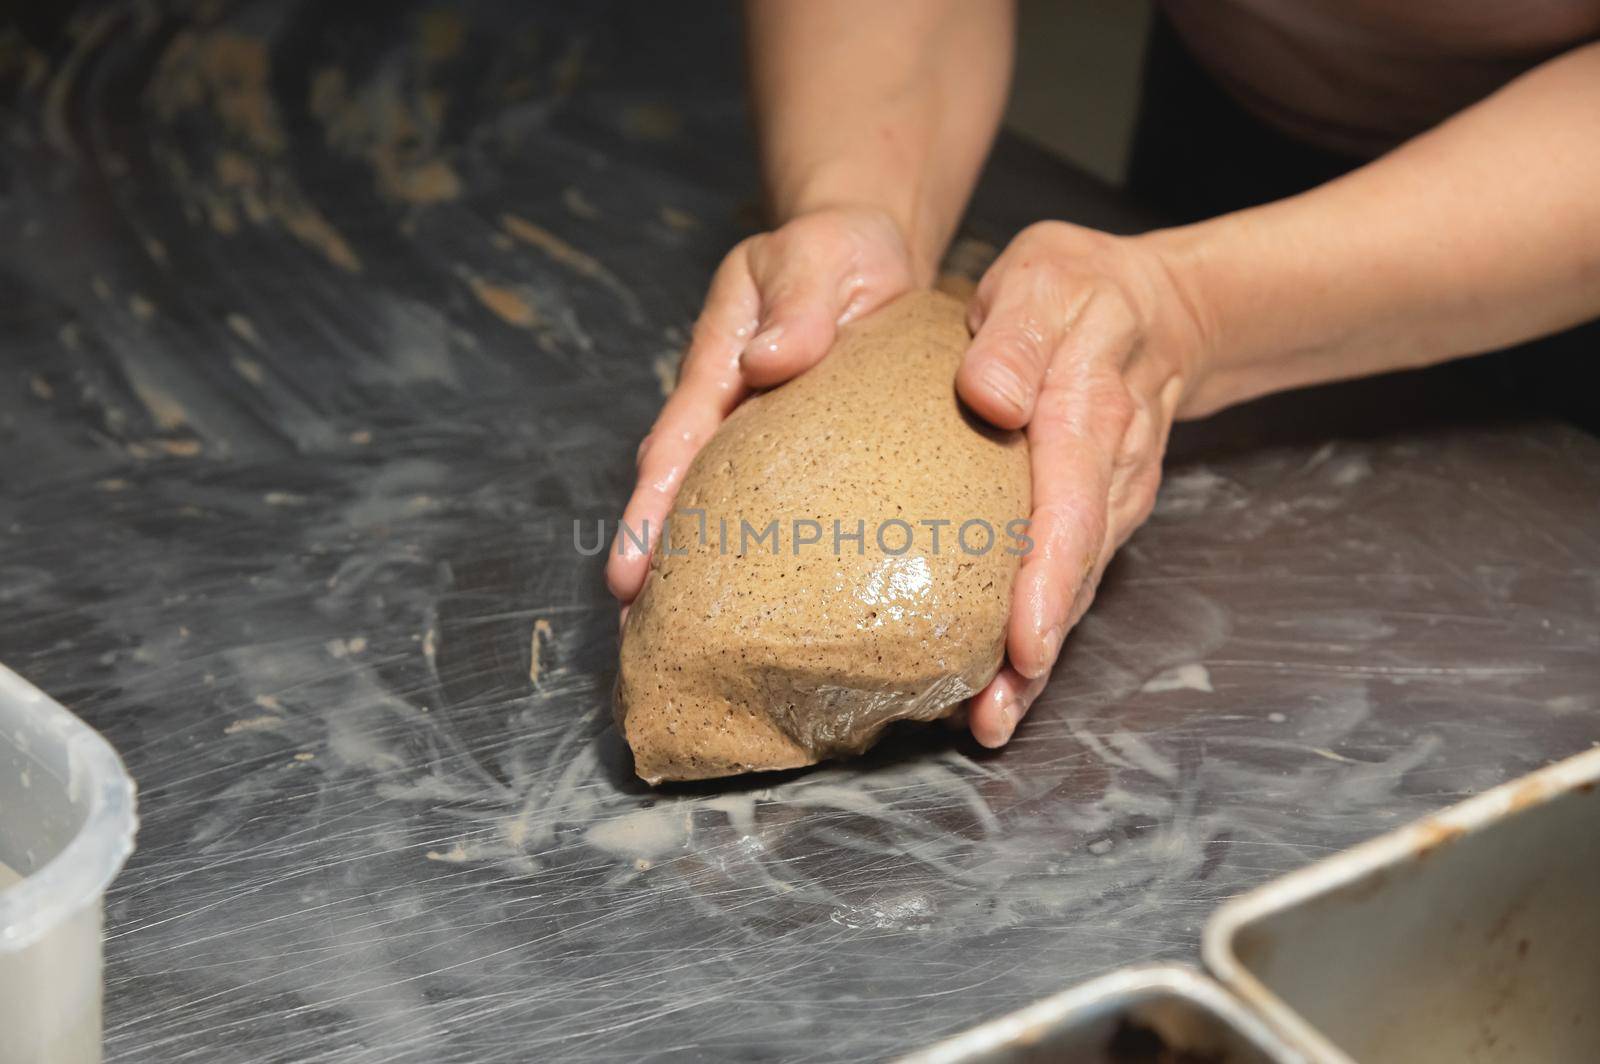 Women's hands carry out actions with raw bread. Dough before dipping into a bakery oven.